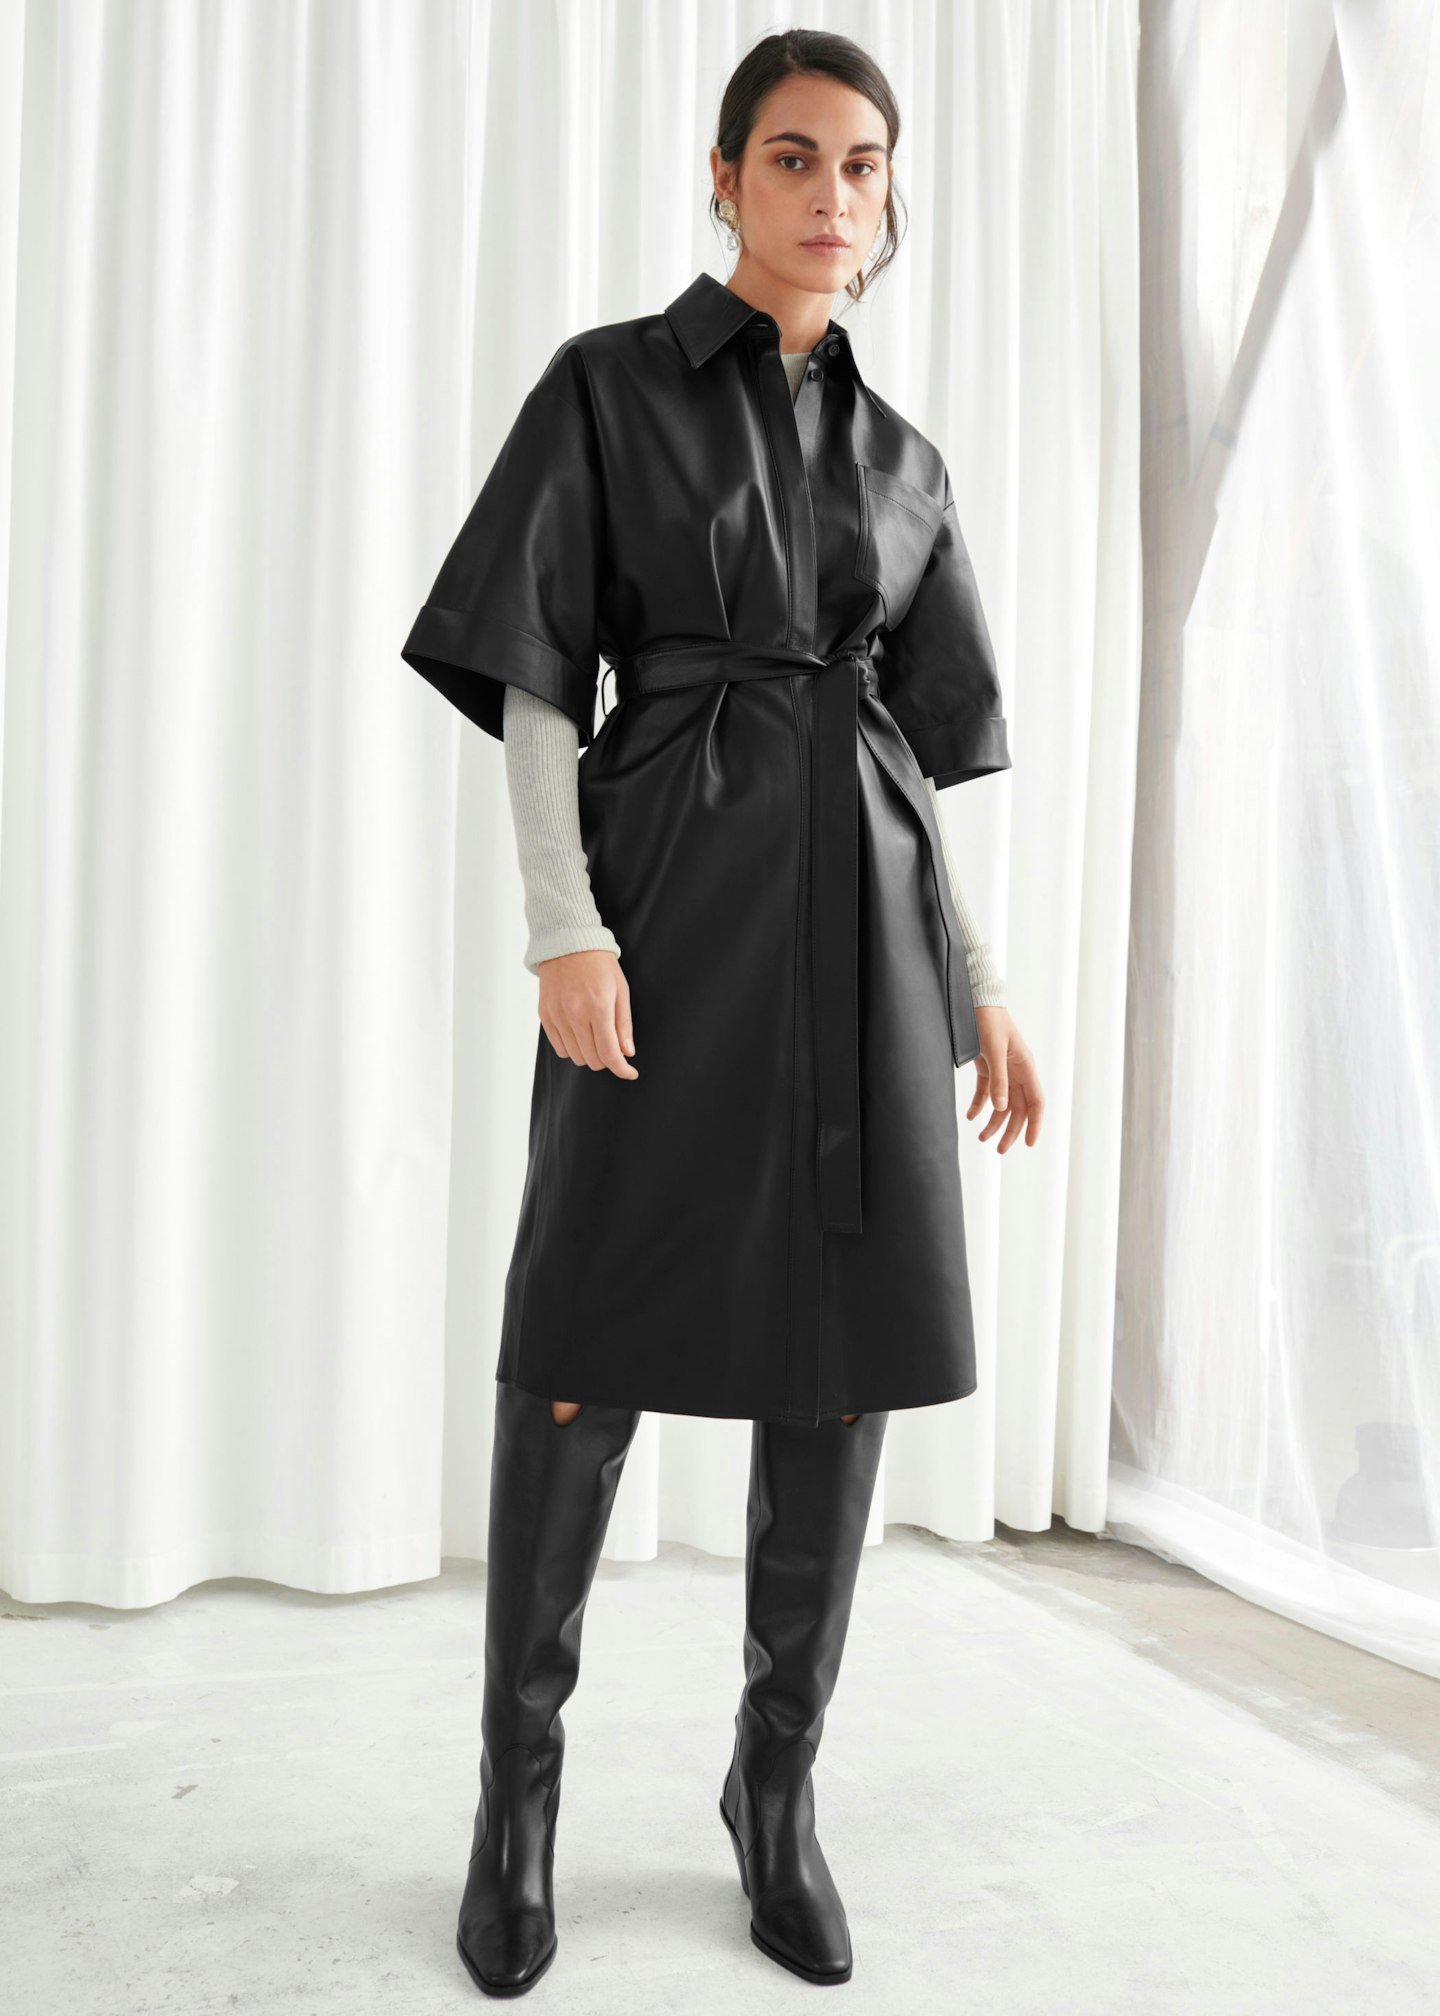 & Other Stories, Oversized Leather Shirt Dress, £299